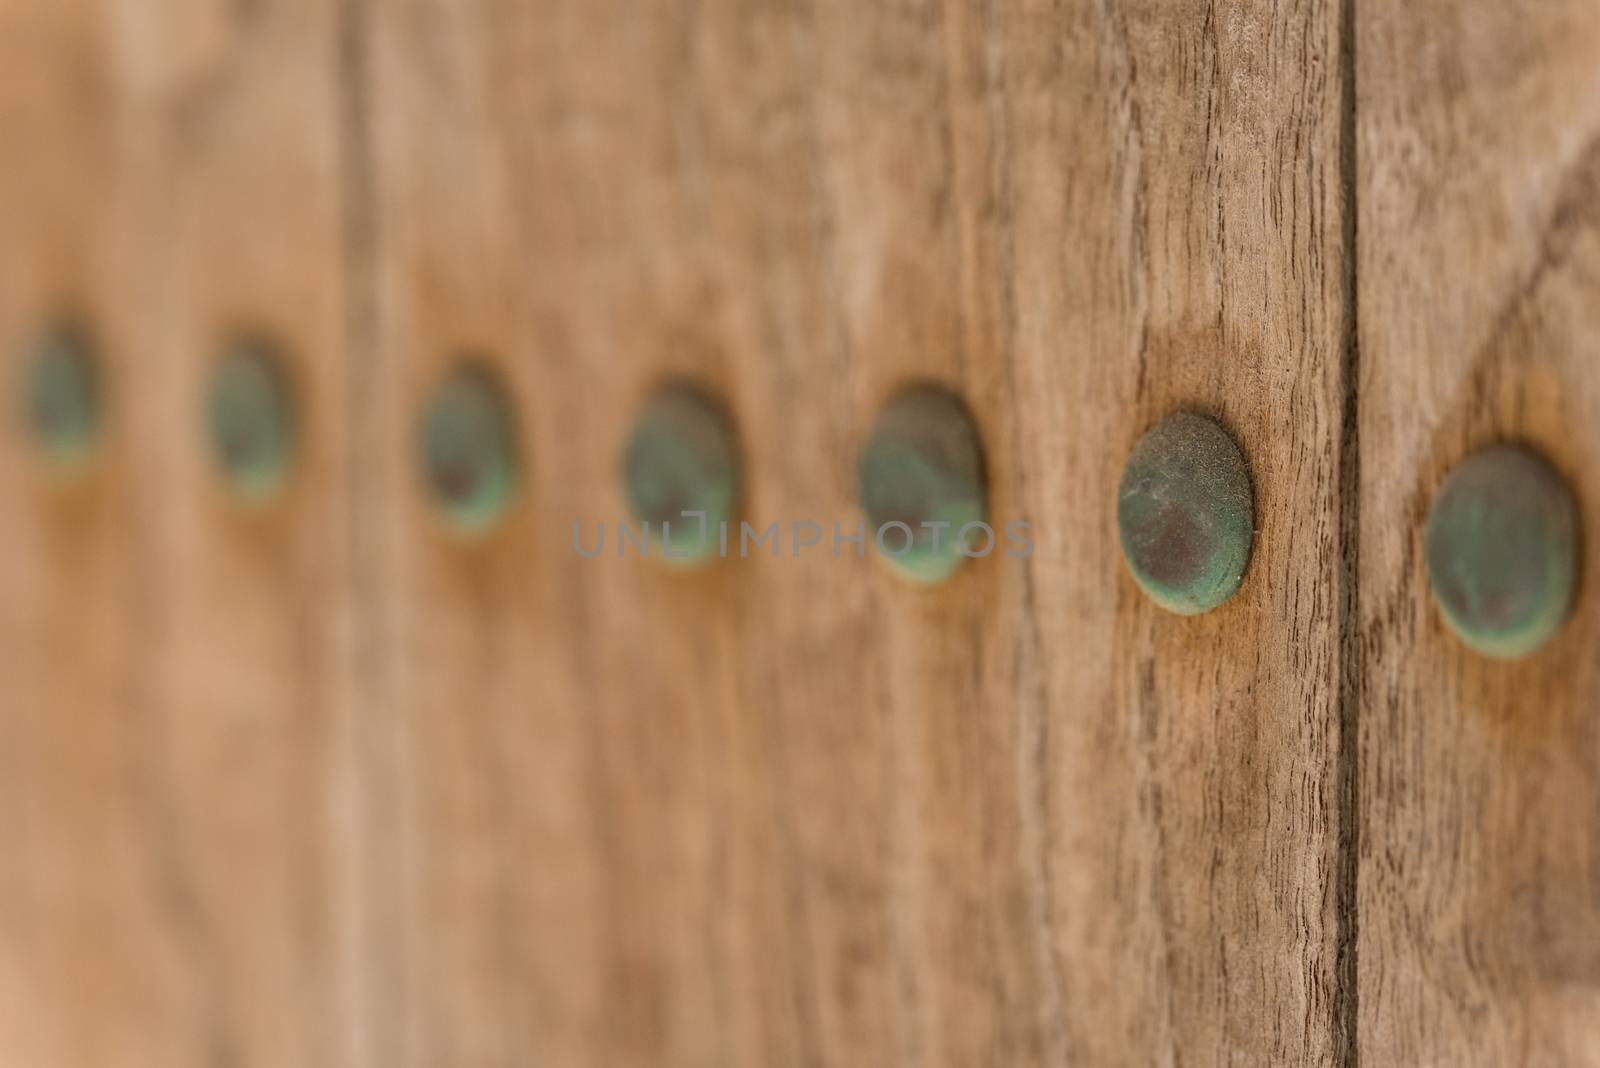 A macro shot of old copper nails which haved turned green due to oxidation on an old wooden door.